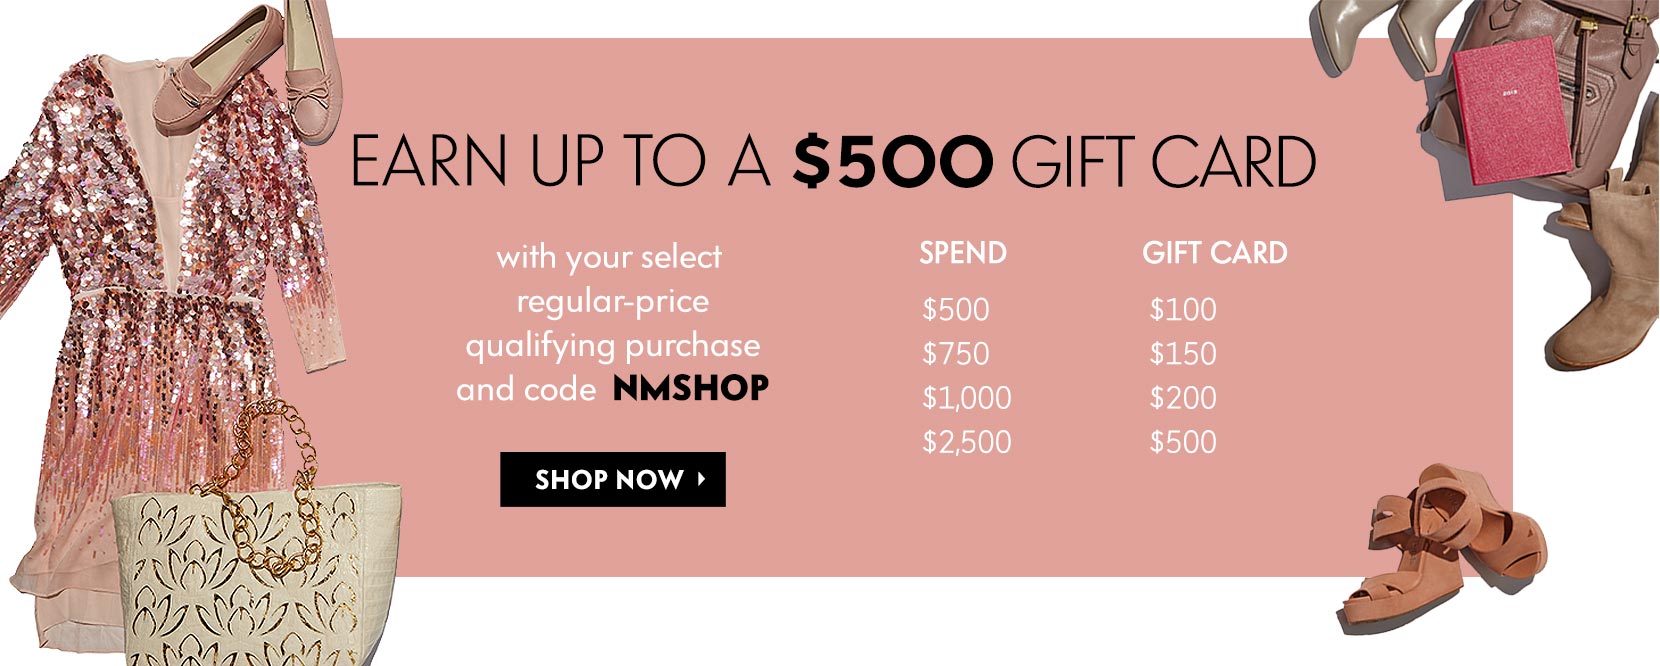 500 Gift Card Giveaway At Neiman Marcus